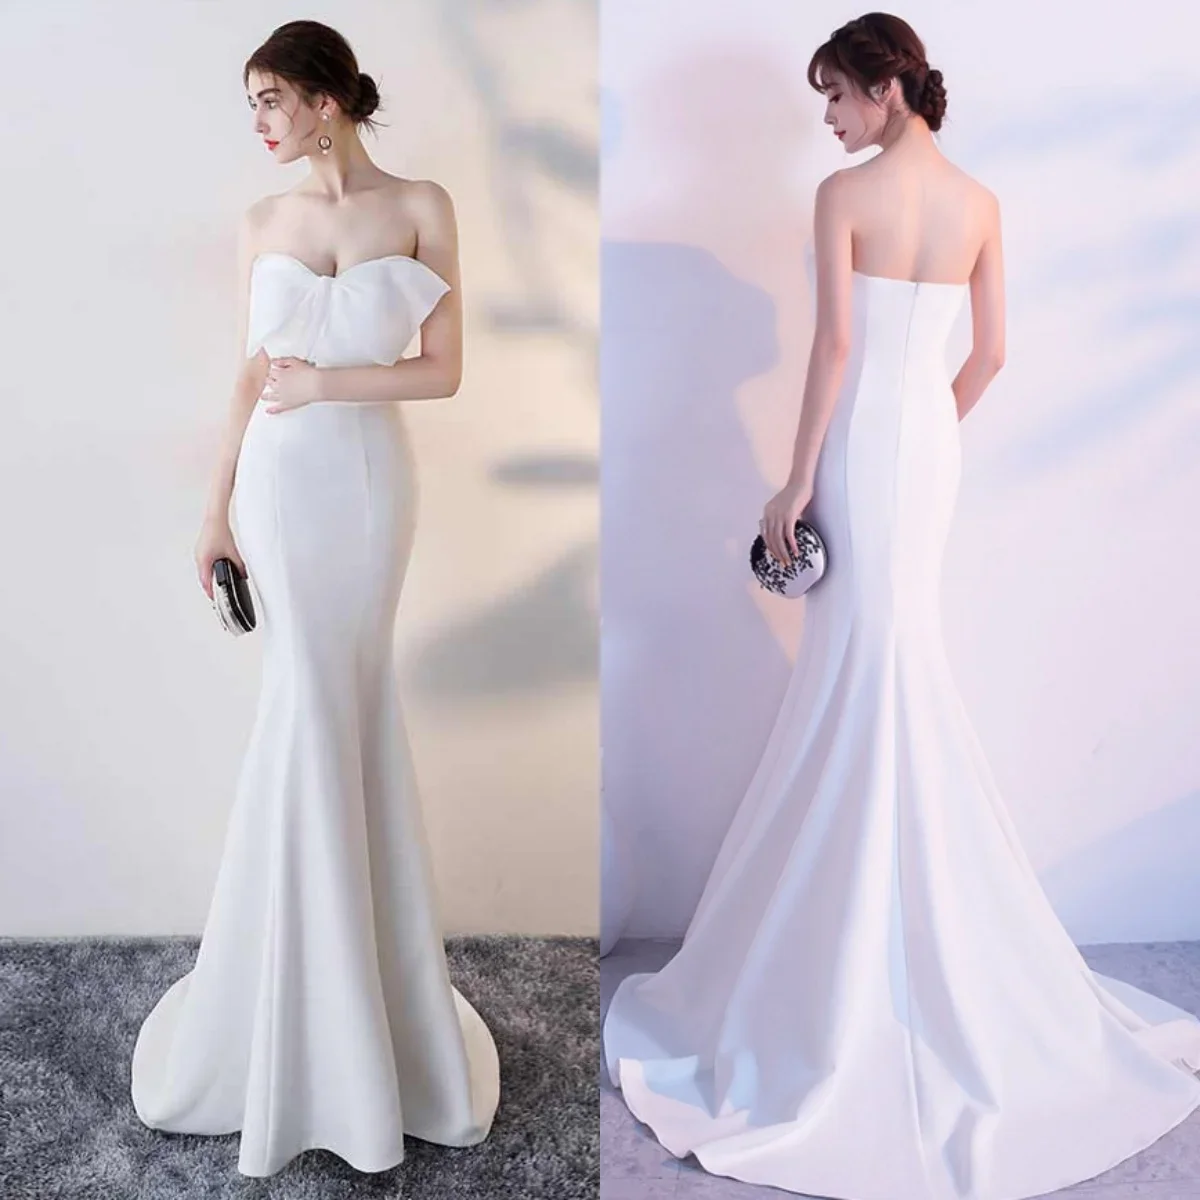 

Evening Dresses White Bow Stretchy Strapless Zipper Back Mermaid Trumpet Floor Length Women Party Formal Gowns YE011